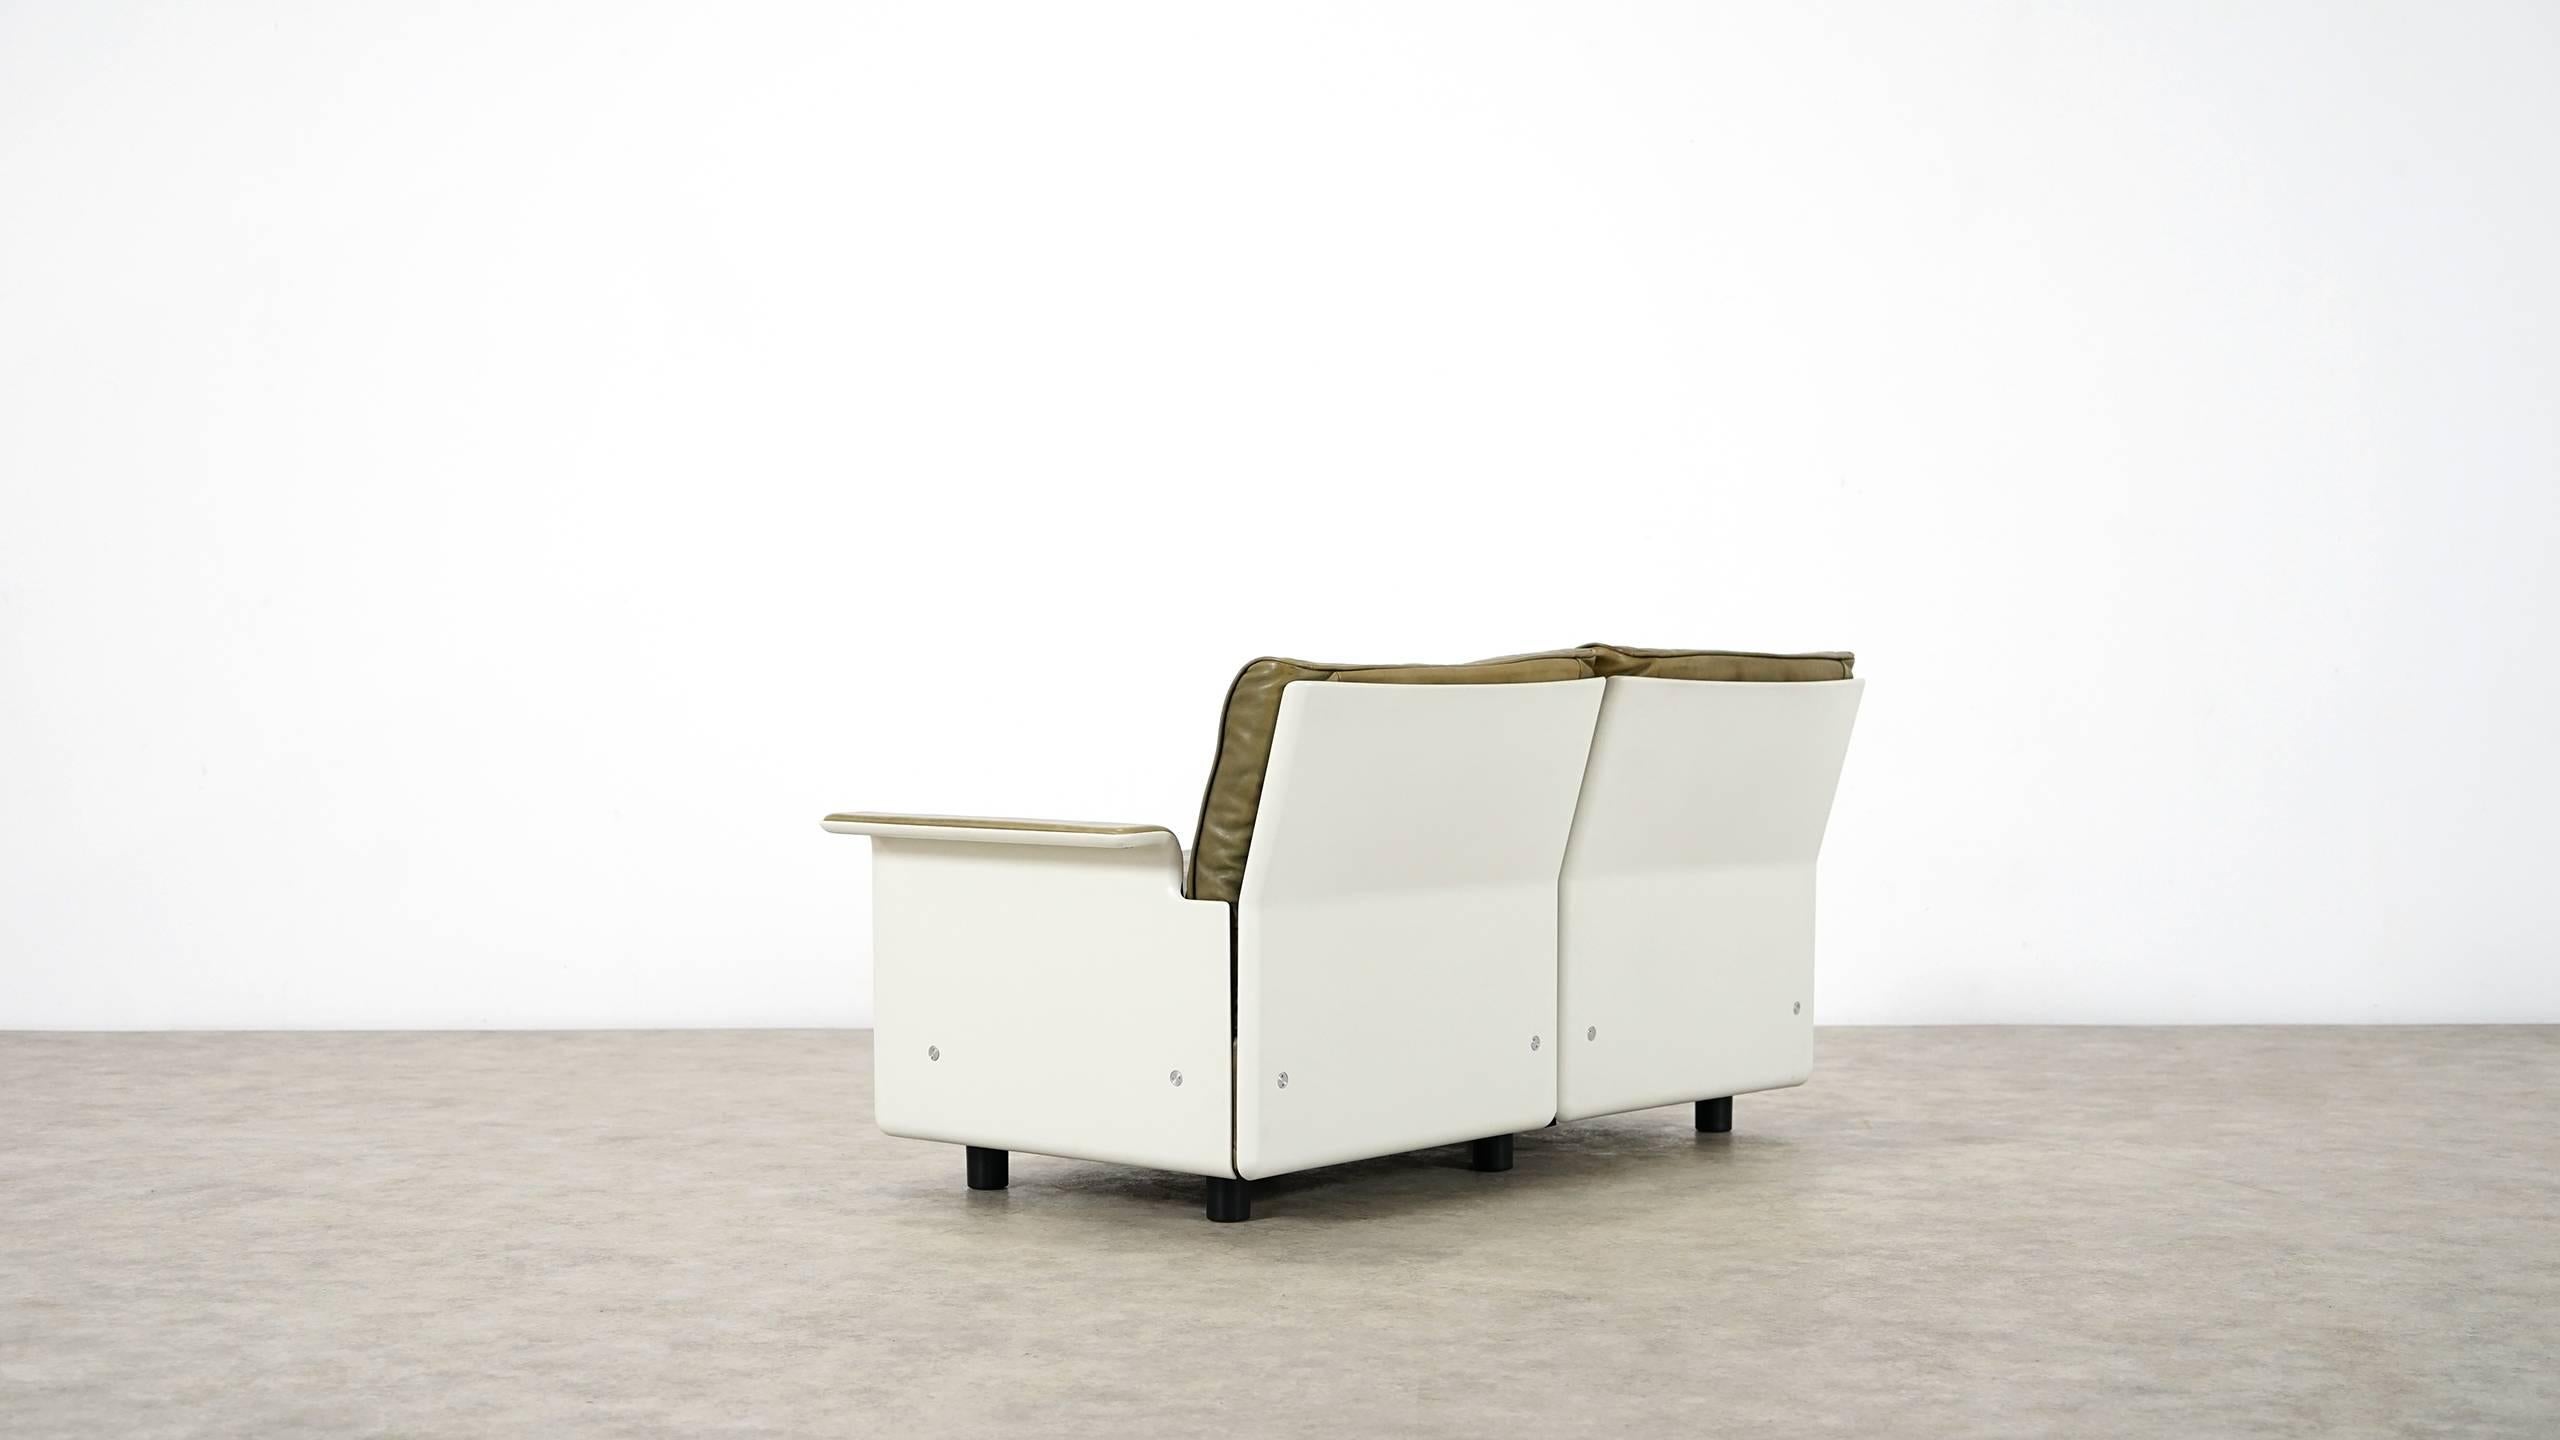 Dieter Rams, Sofa RZ 62 in Olivgreen Leather by Vitsœ, Two-Seat 1